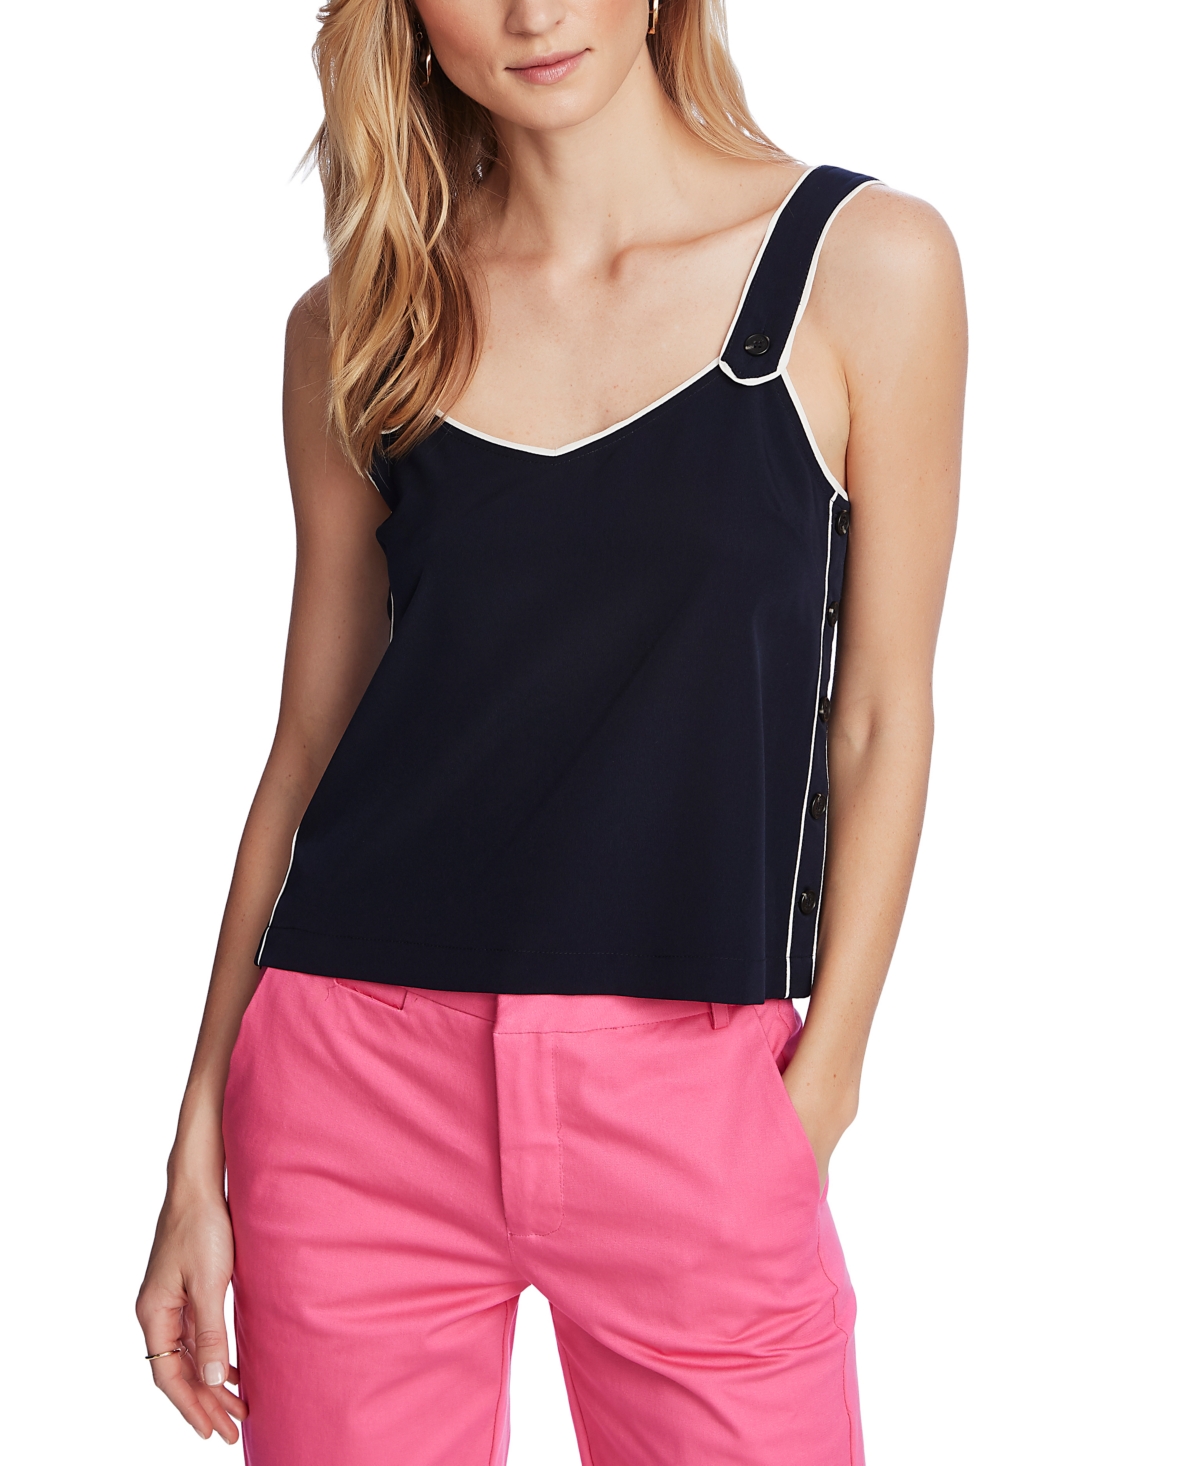 Women's Contrast-Piped V-neck Tank Top - Blue Night